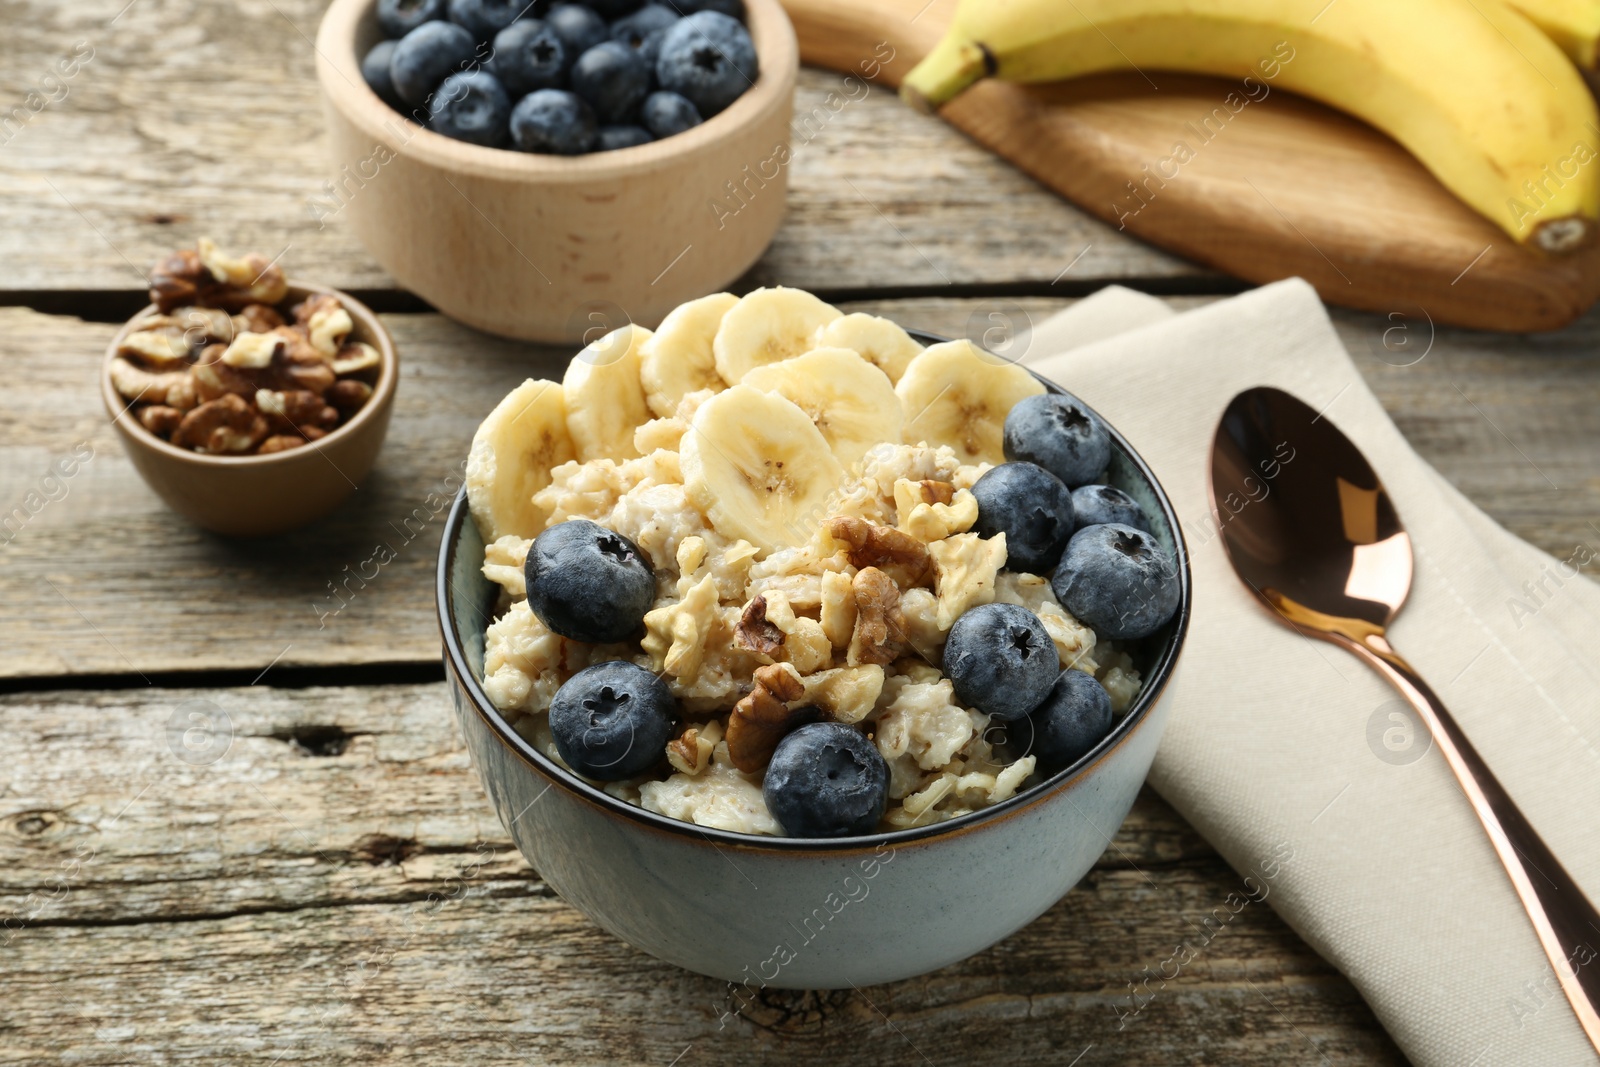 Photo of Tasty oatmeal with banana, blueberries and walnuts served in bowl on wooden table